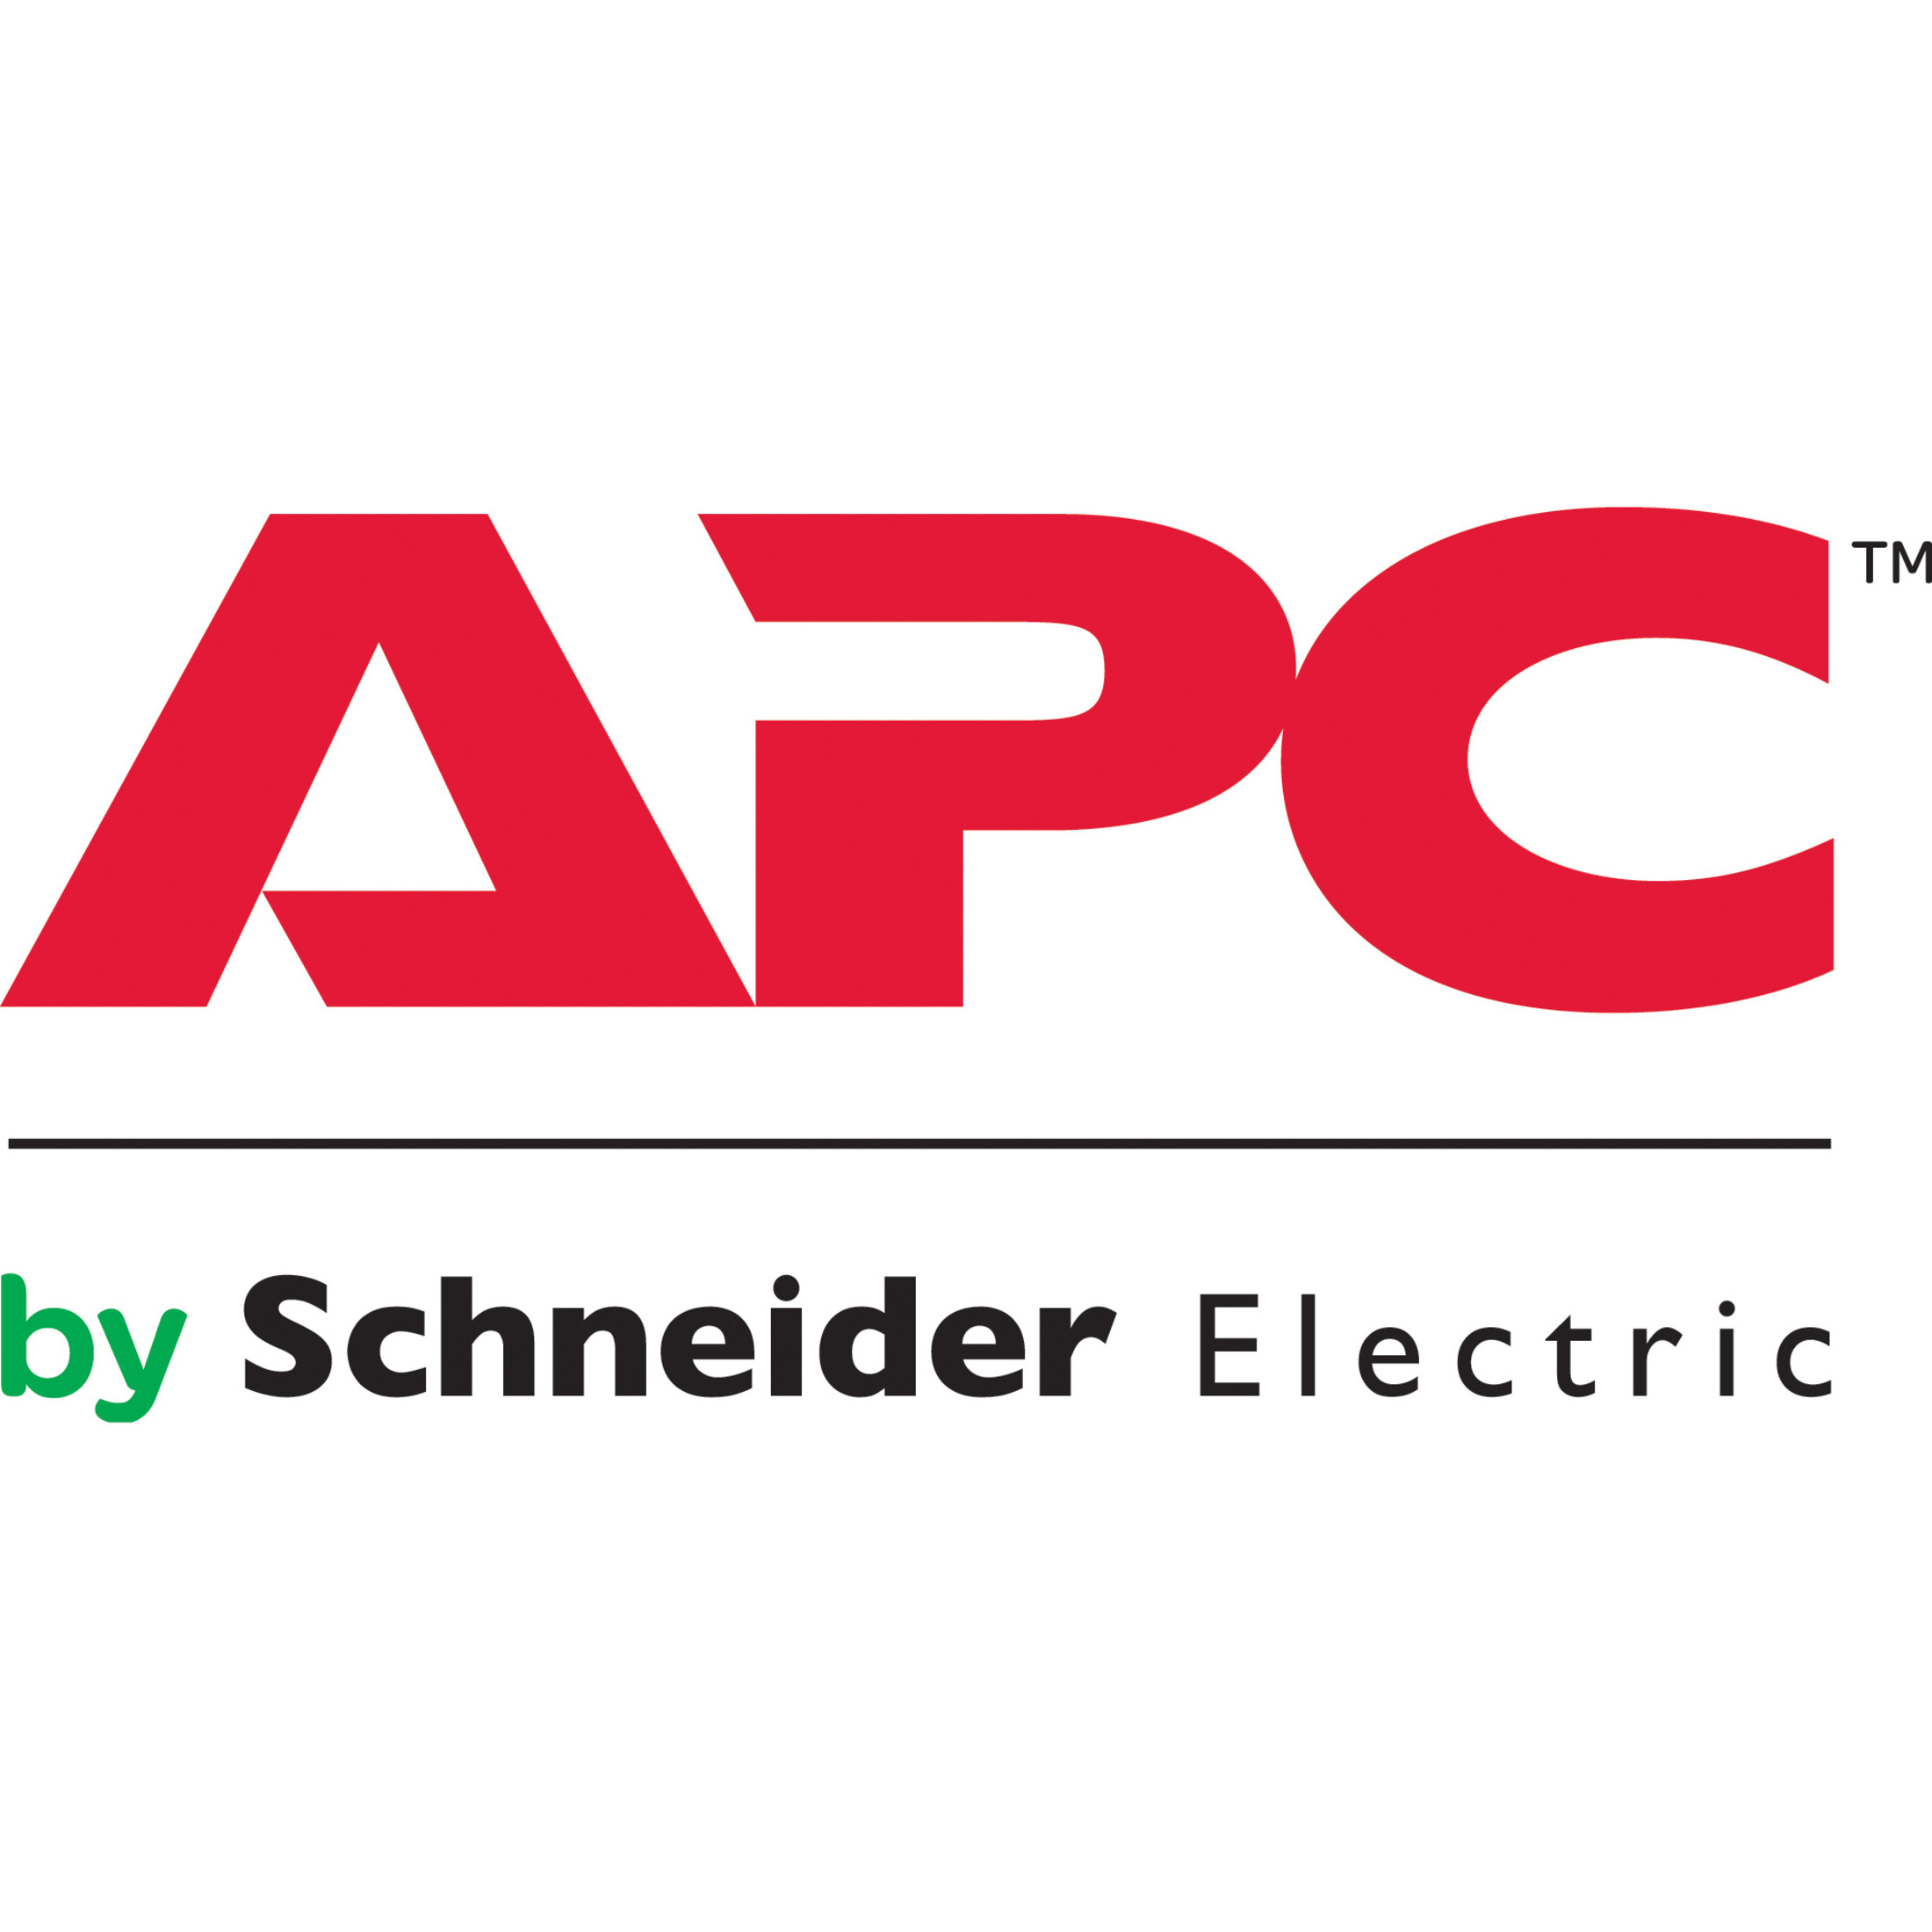 APC by Schneider Electric Assembly ServiceService8 x 5InstallationLaborElectronic and Physical WASSEM-VX-50